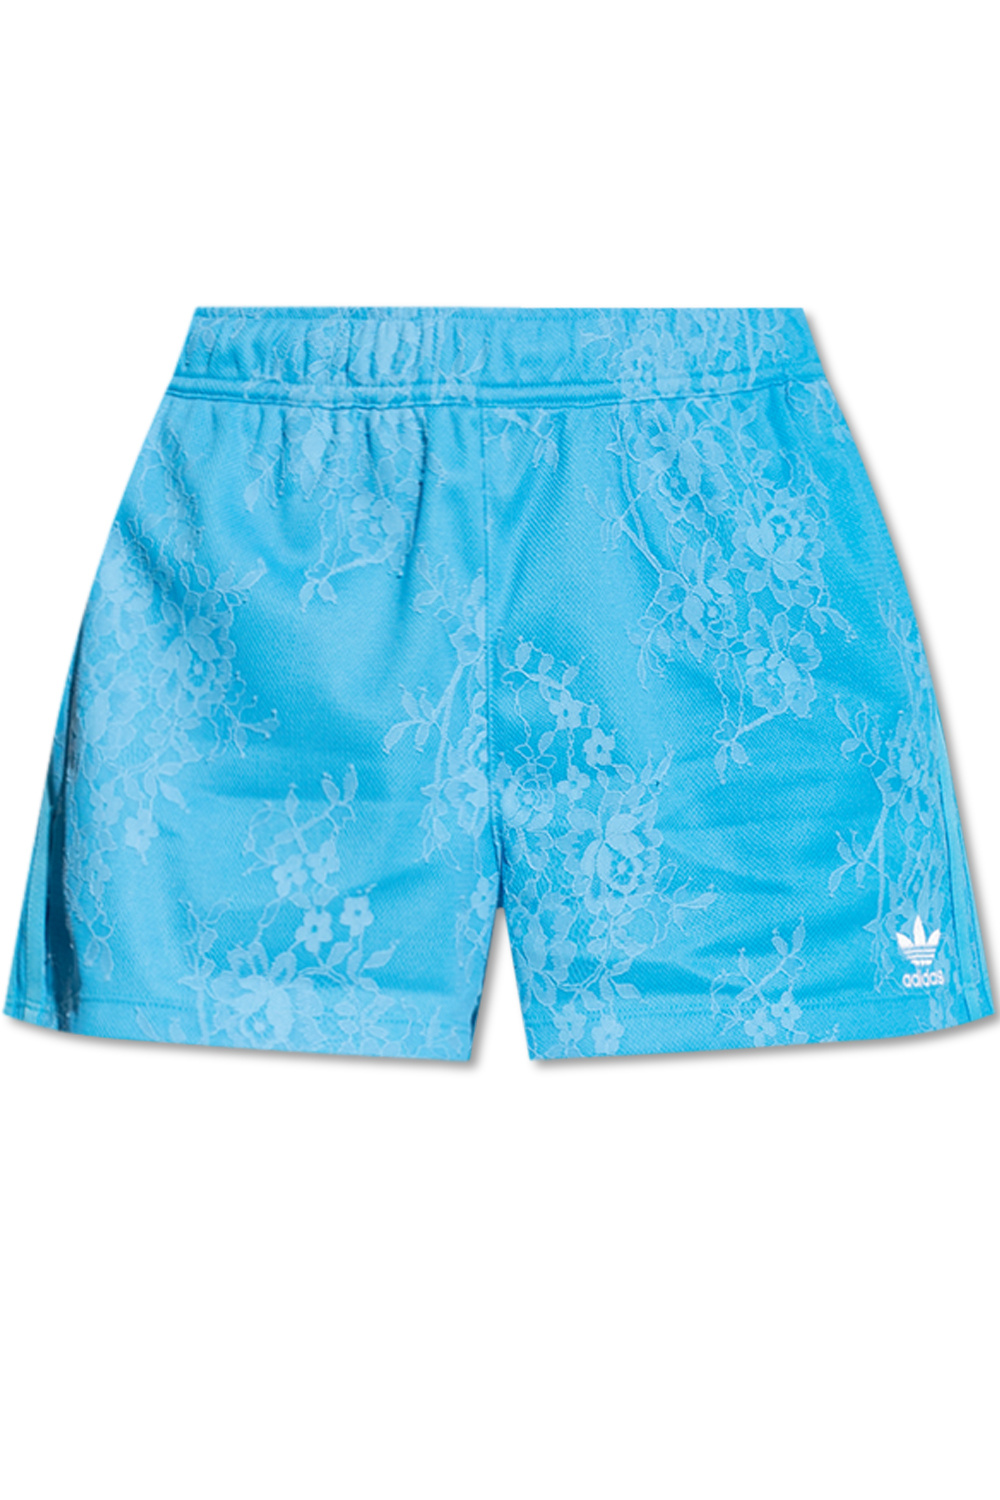 Aqua Blue Lace Detail Shorts Size 3 Small Summer Travel Booty